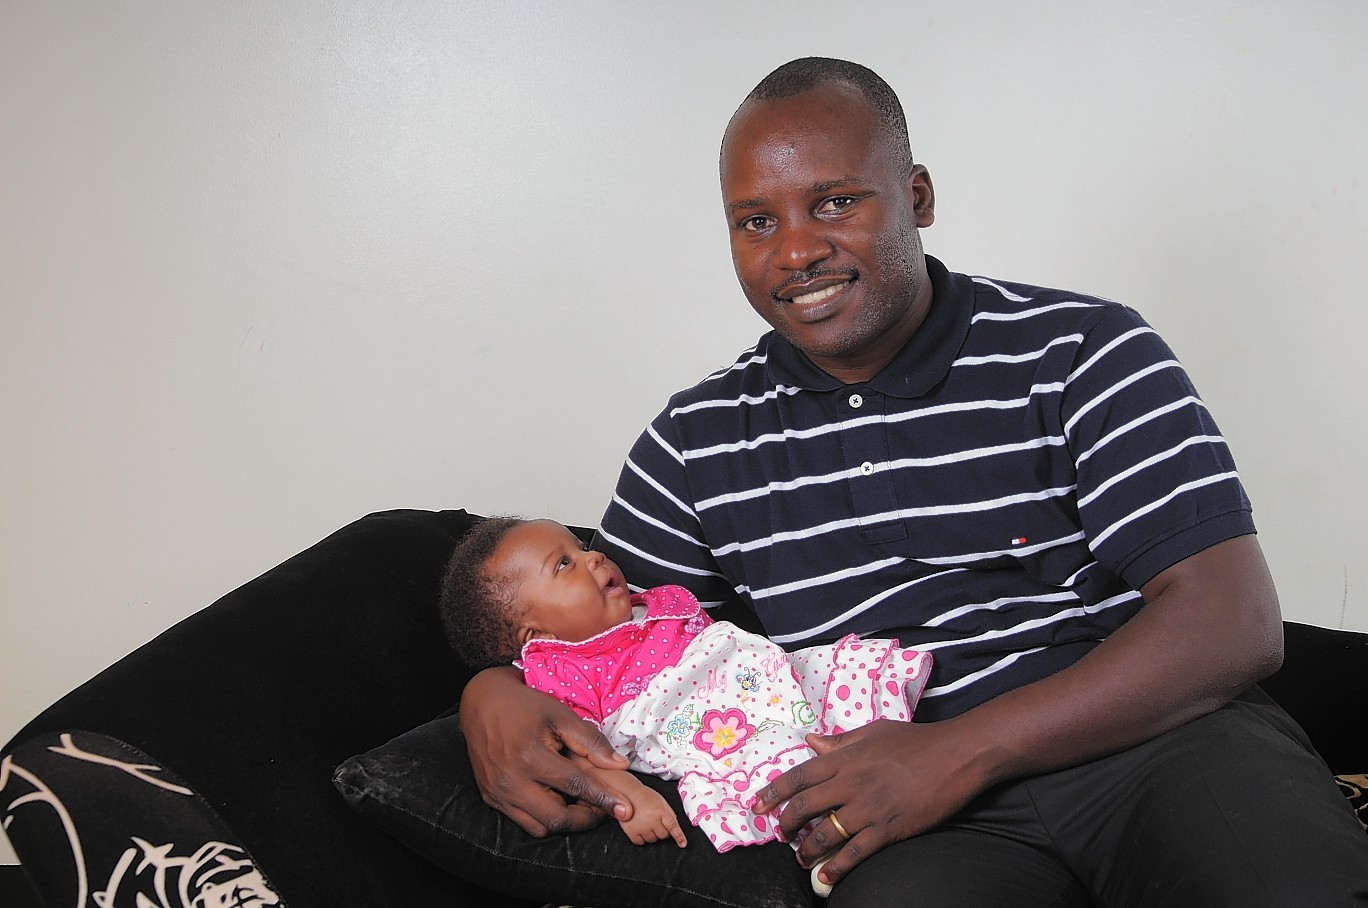 Pictured is baby OPITO with her dad Edgar Tusingwire.

She was named after The Oil and Gas Industry's focal point for skills, learning and workforce development, OPITO

09/10/15